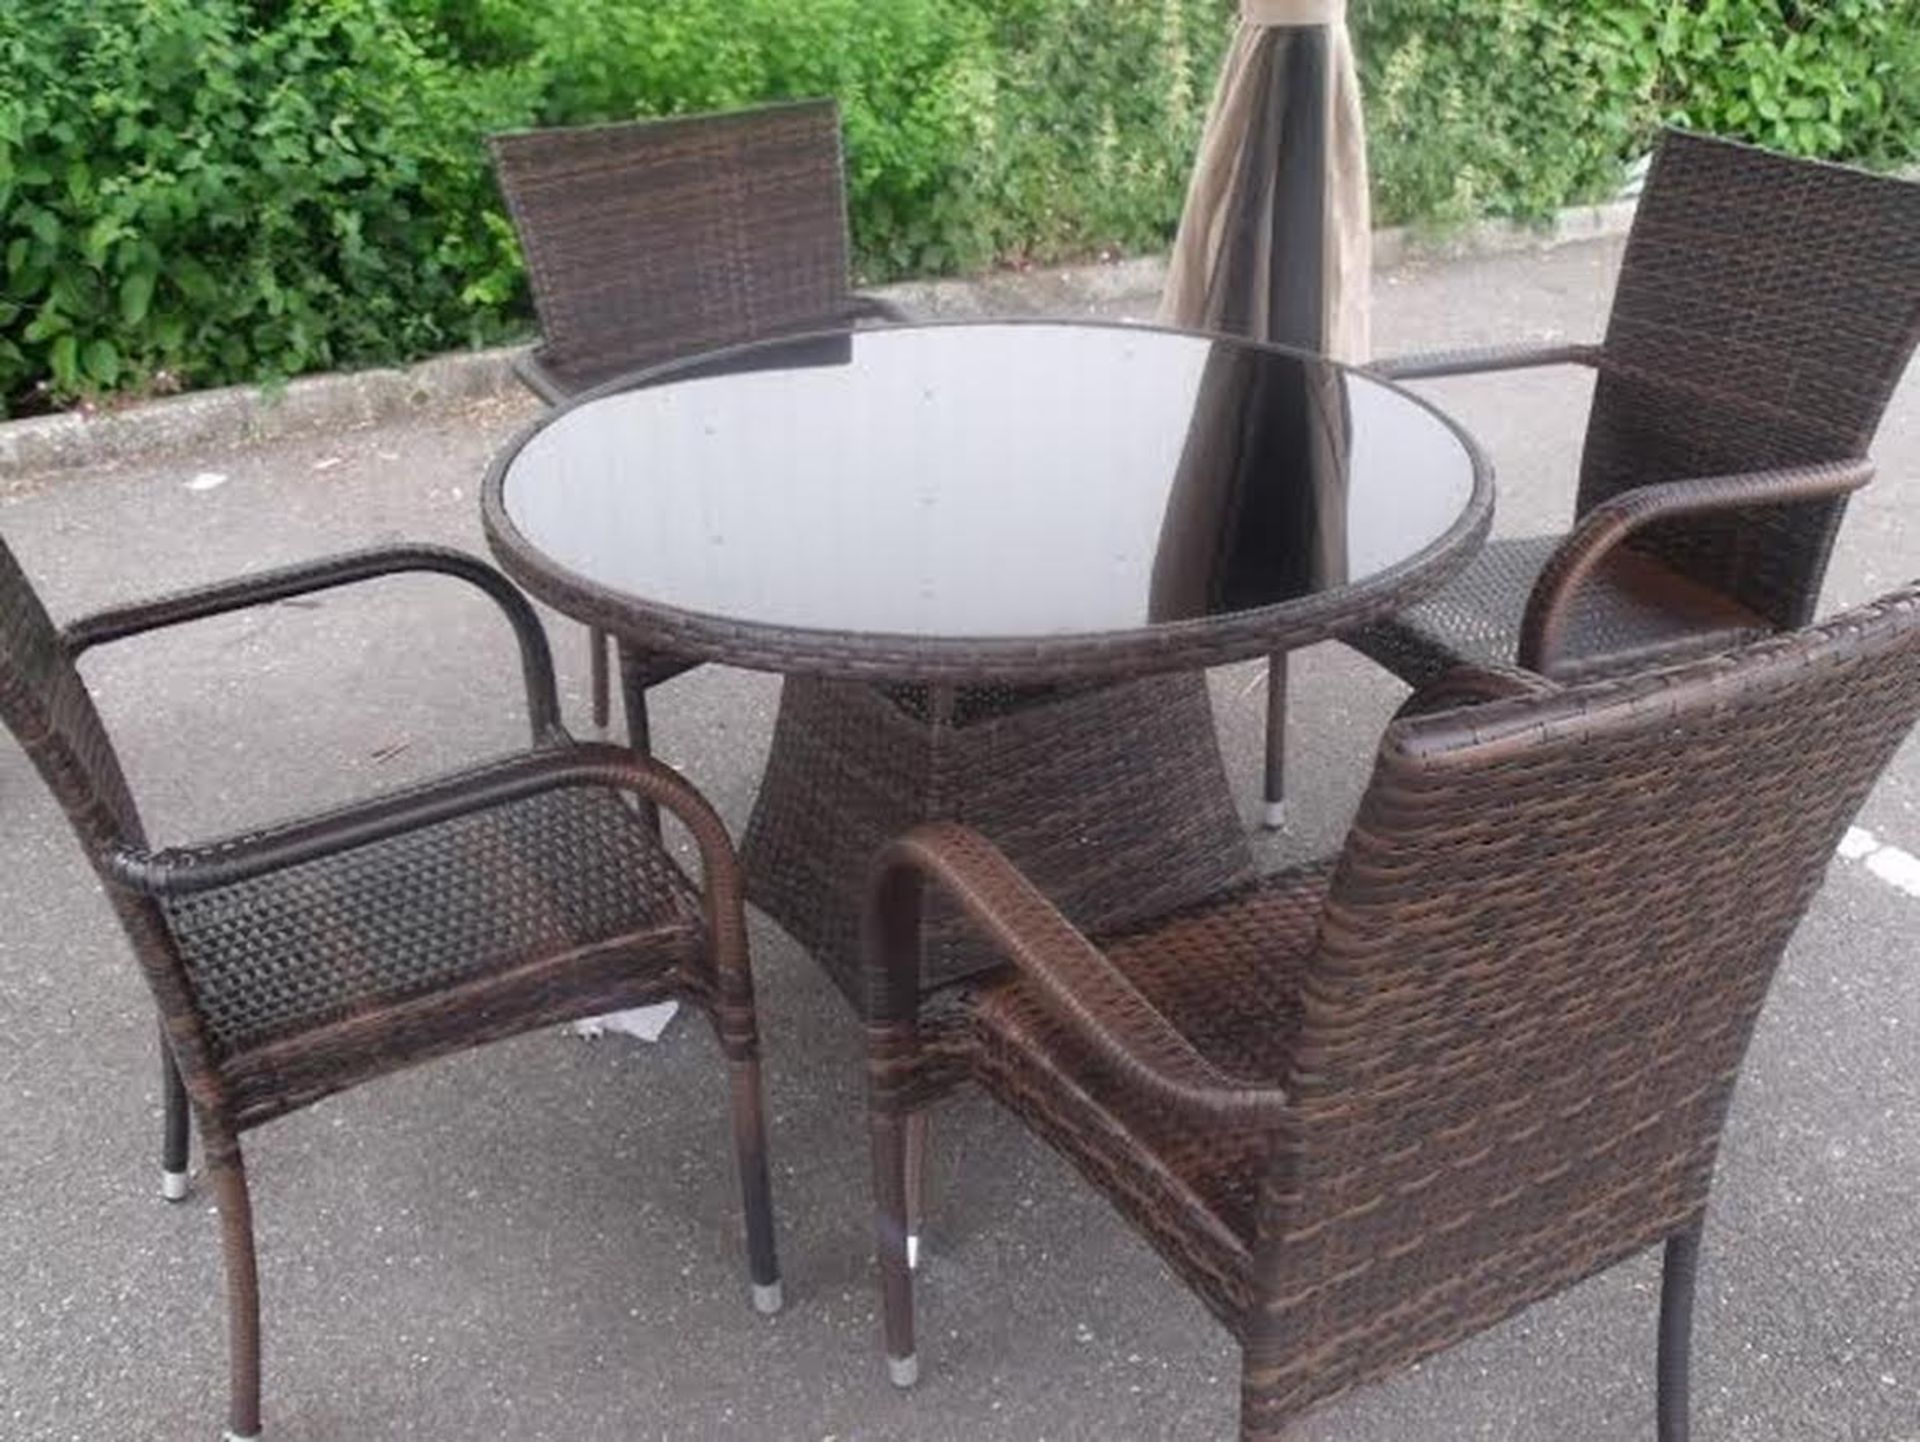 Brand New 5 Piece Zebrano Patio Dining Set All weather multi brown rattan Ideal Pub / Hotel /